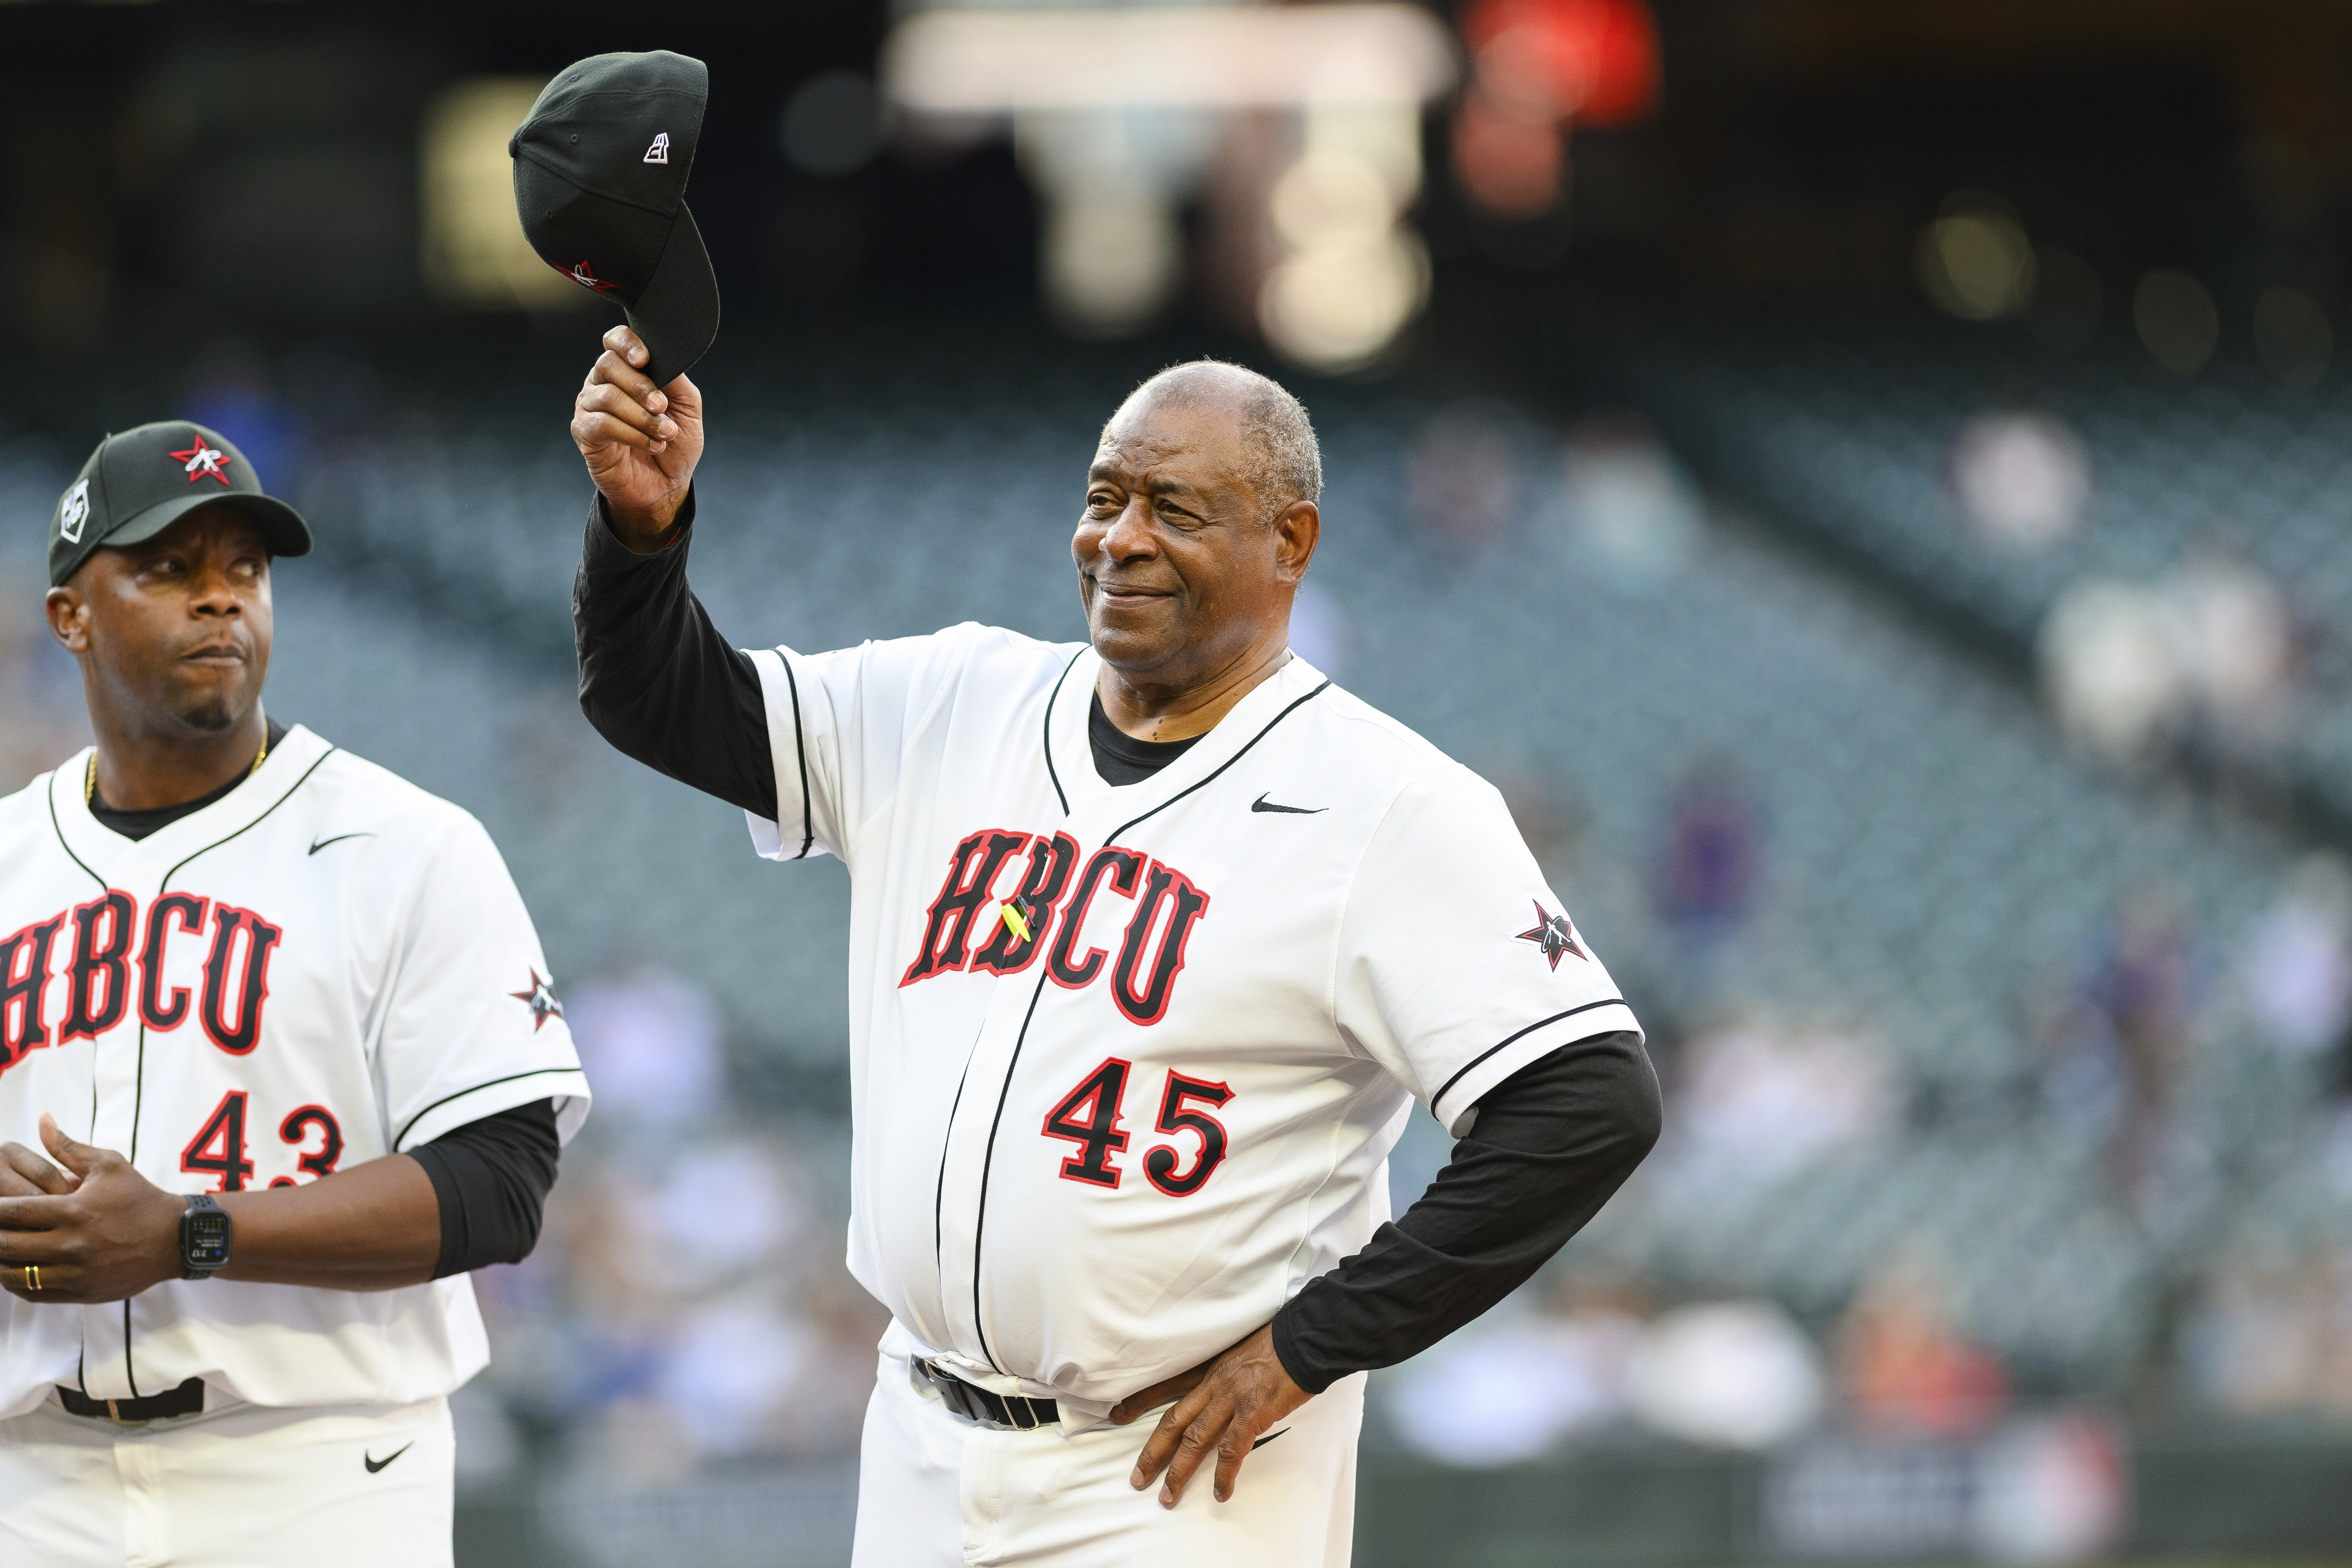 With Griffey's help, MLB hosts HBCU All-Star Game